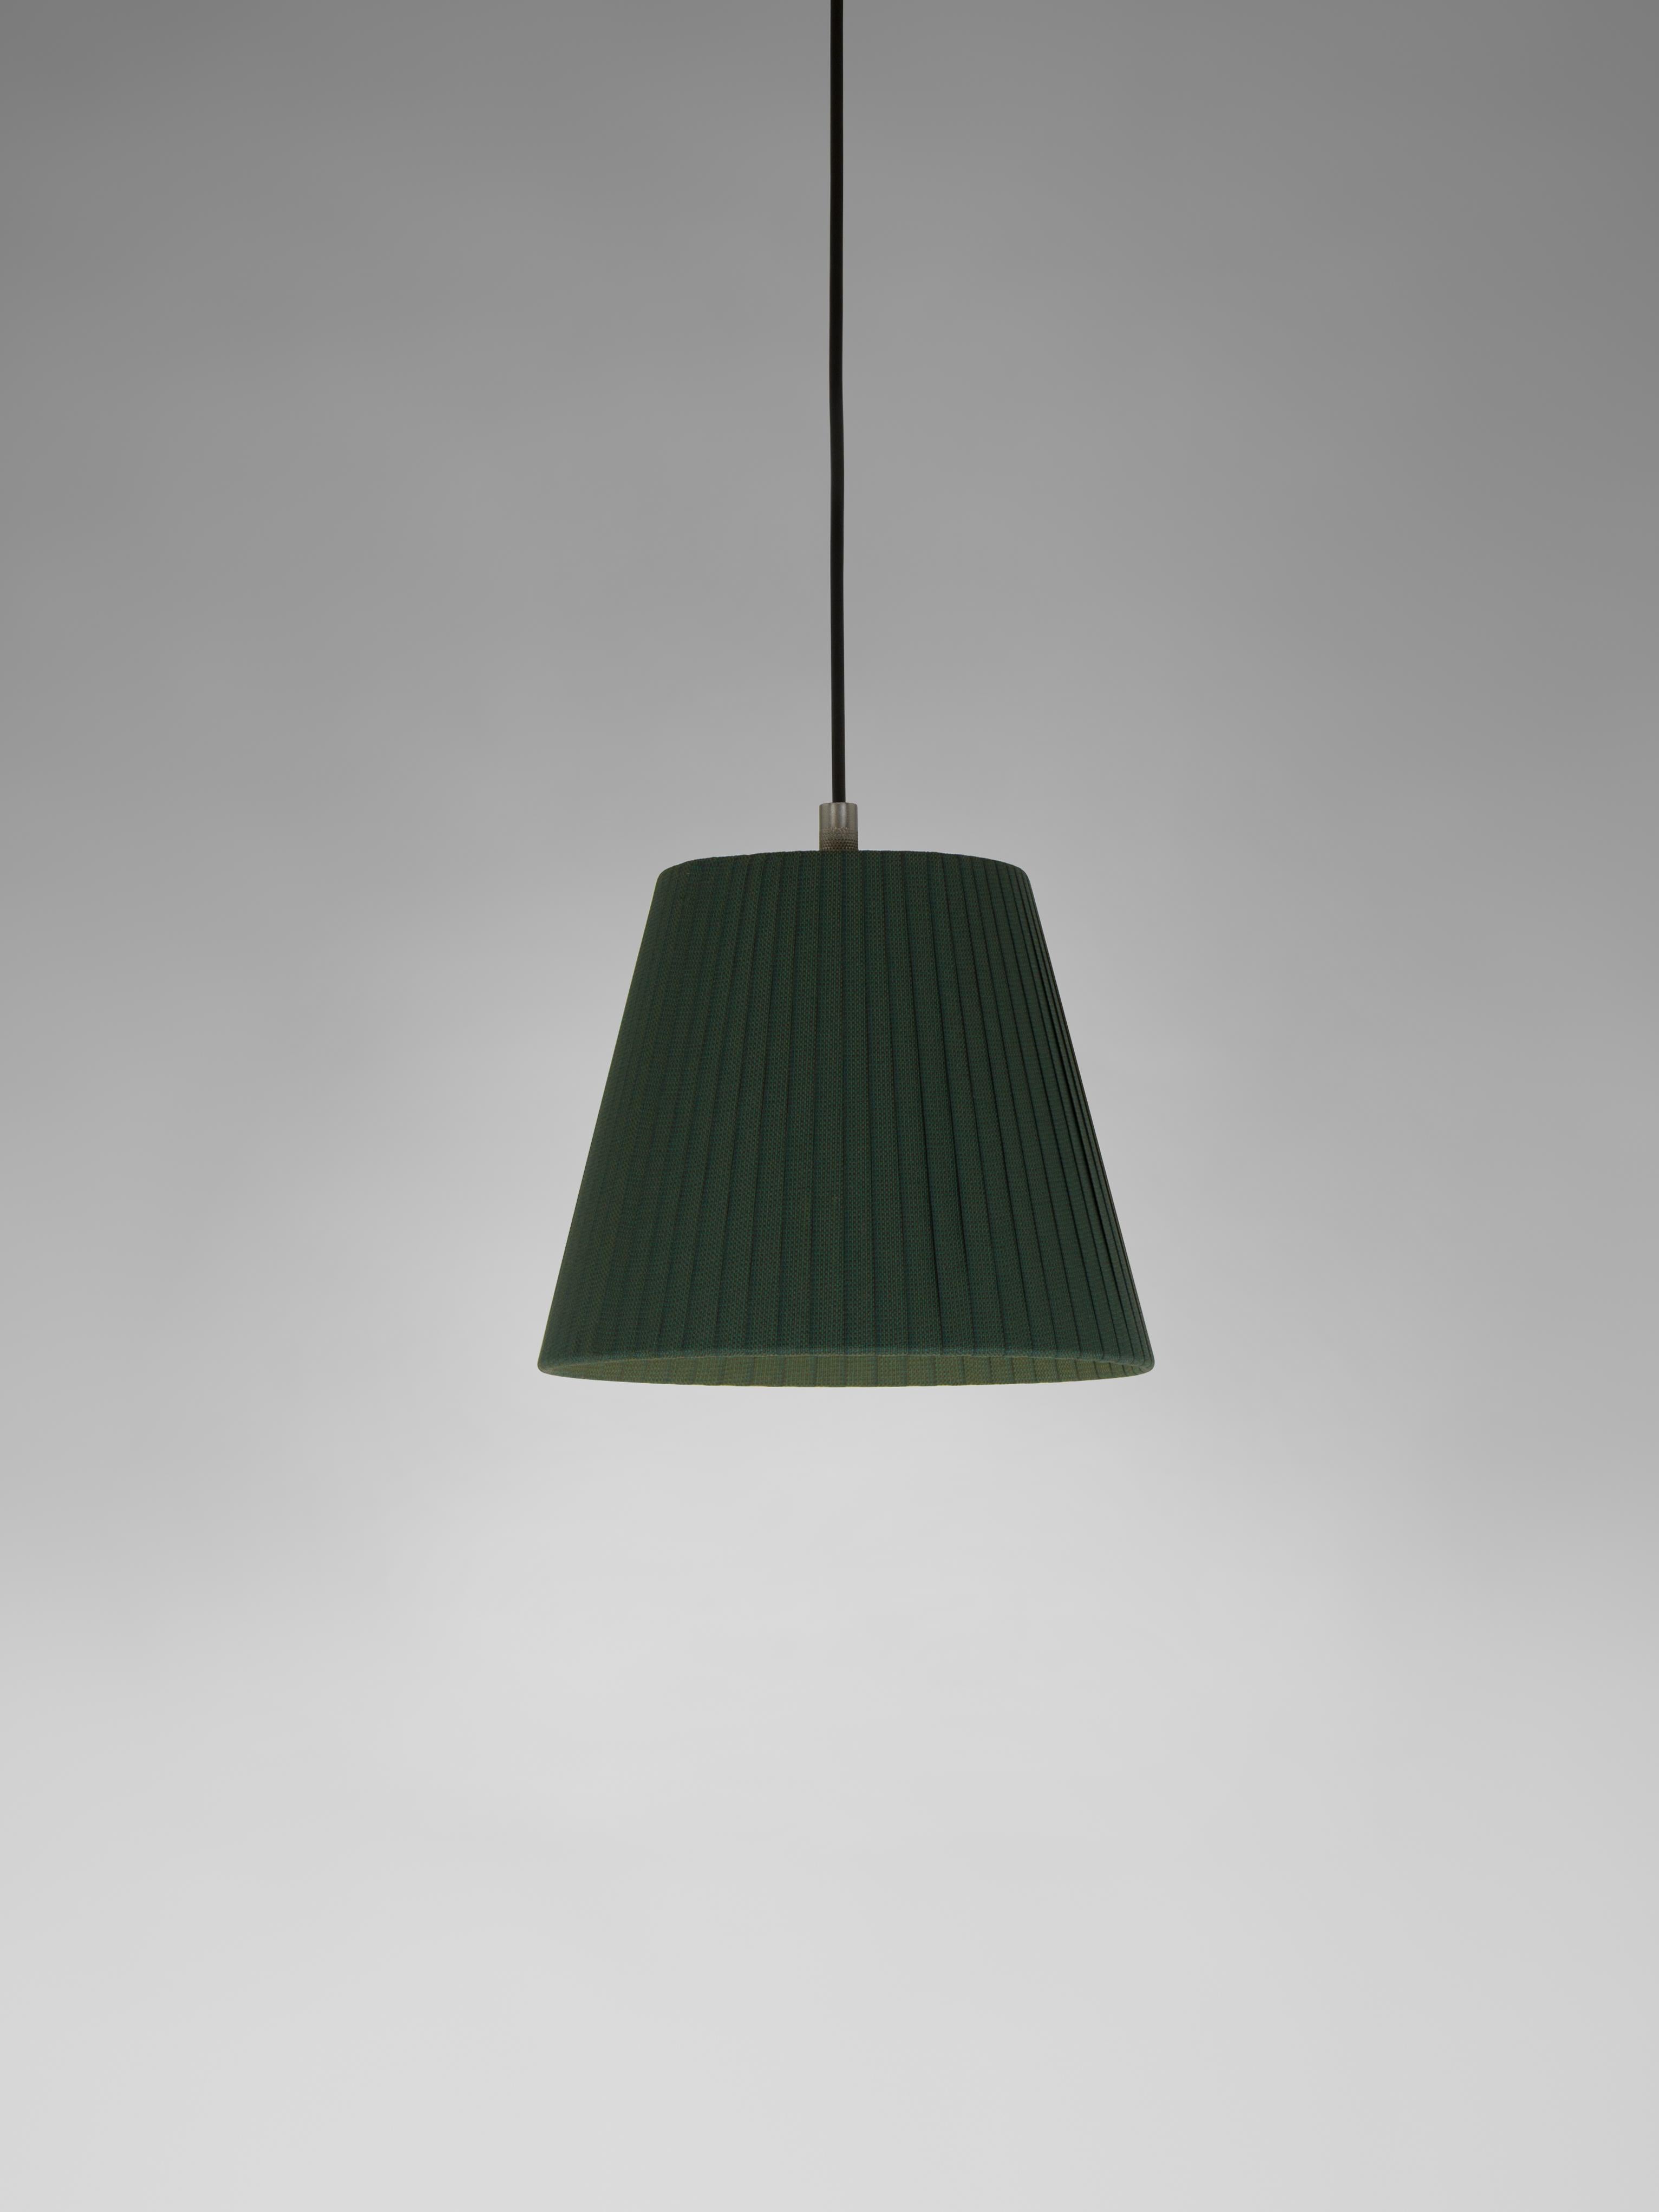 Green Sísísí Cónicas PT1 pendant lamp by Santa & Cole
Dimensions: D 20 x H 16 cm
Materials: Metal, ribbon.
Available in other colors.

The conical shape group has multiple finishes and sizes. It consists of four sizes: PT1, MT1, GT1 and GT3,